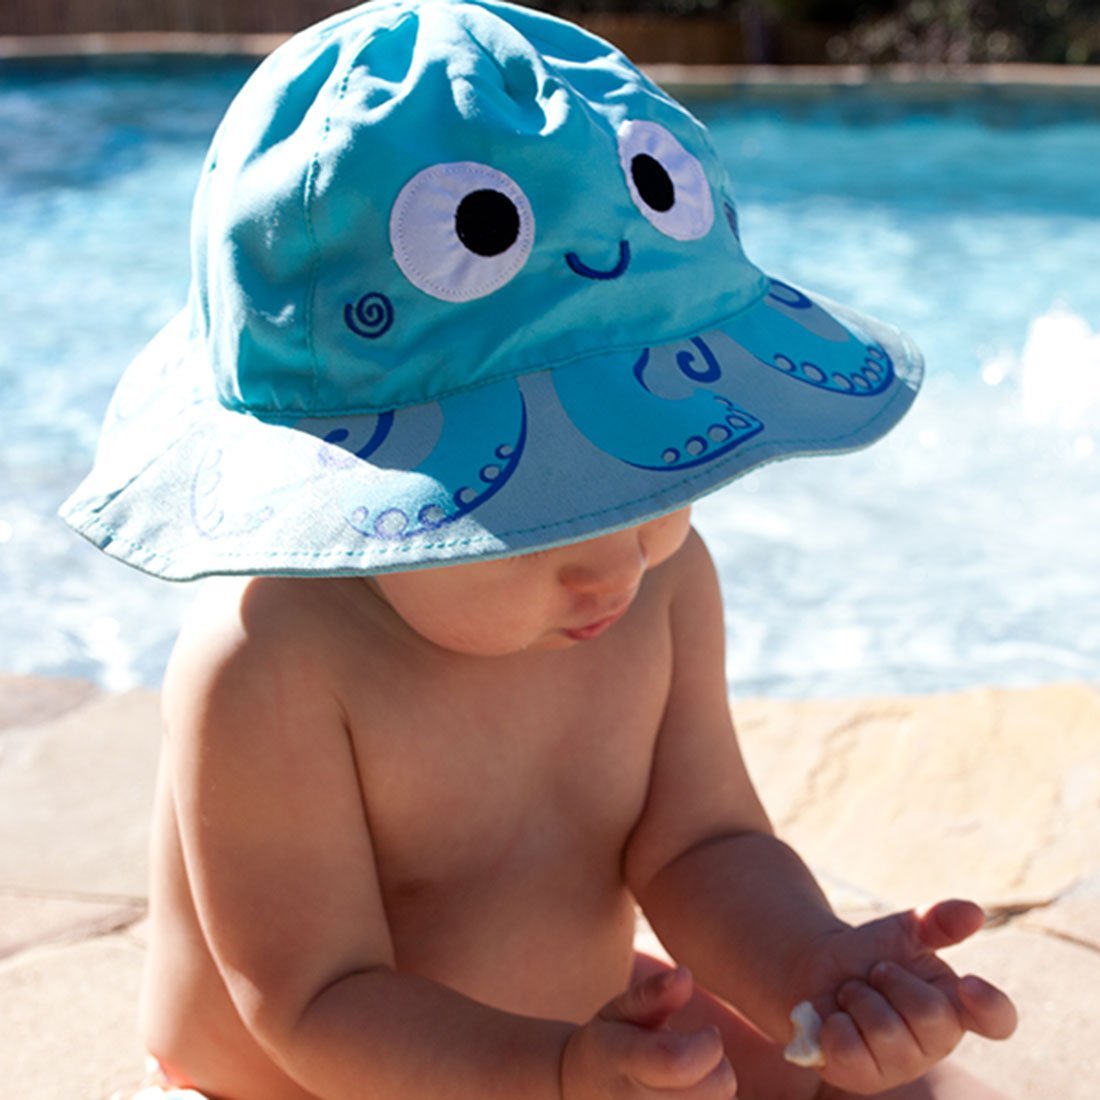 Zoocchini Baby Sunhat - Owie the Octopus